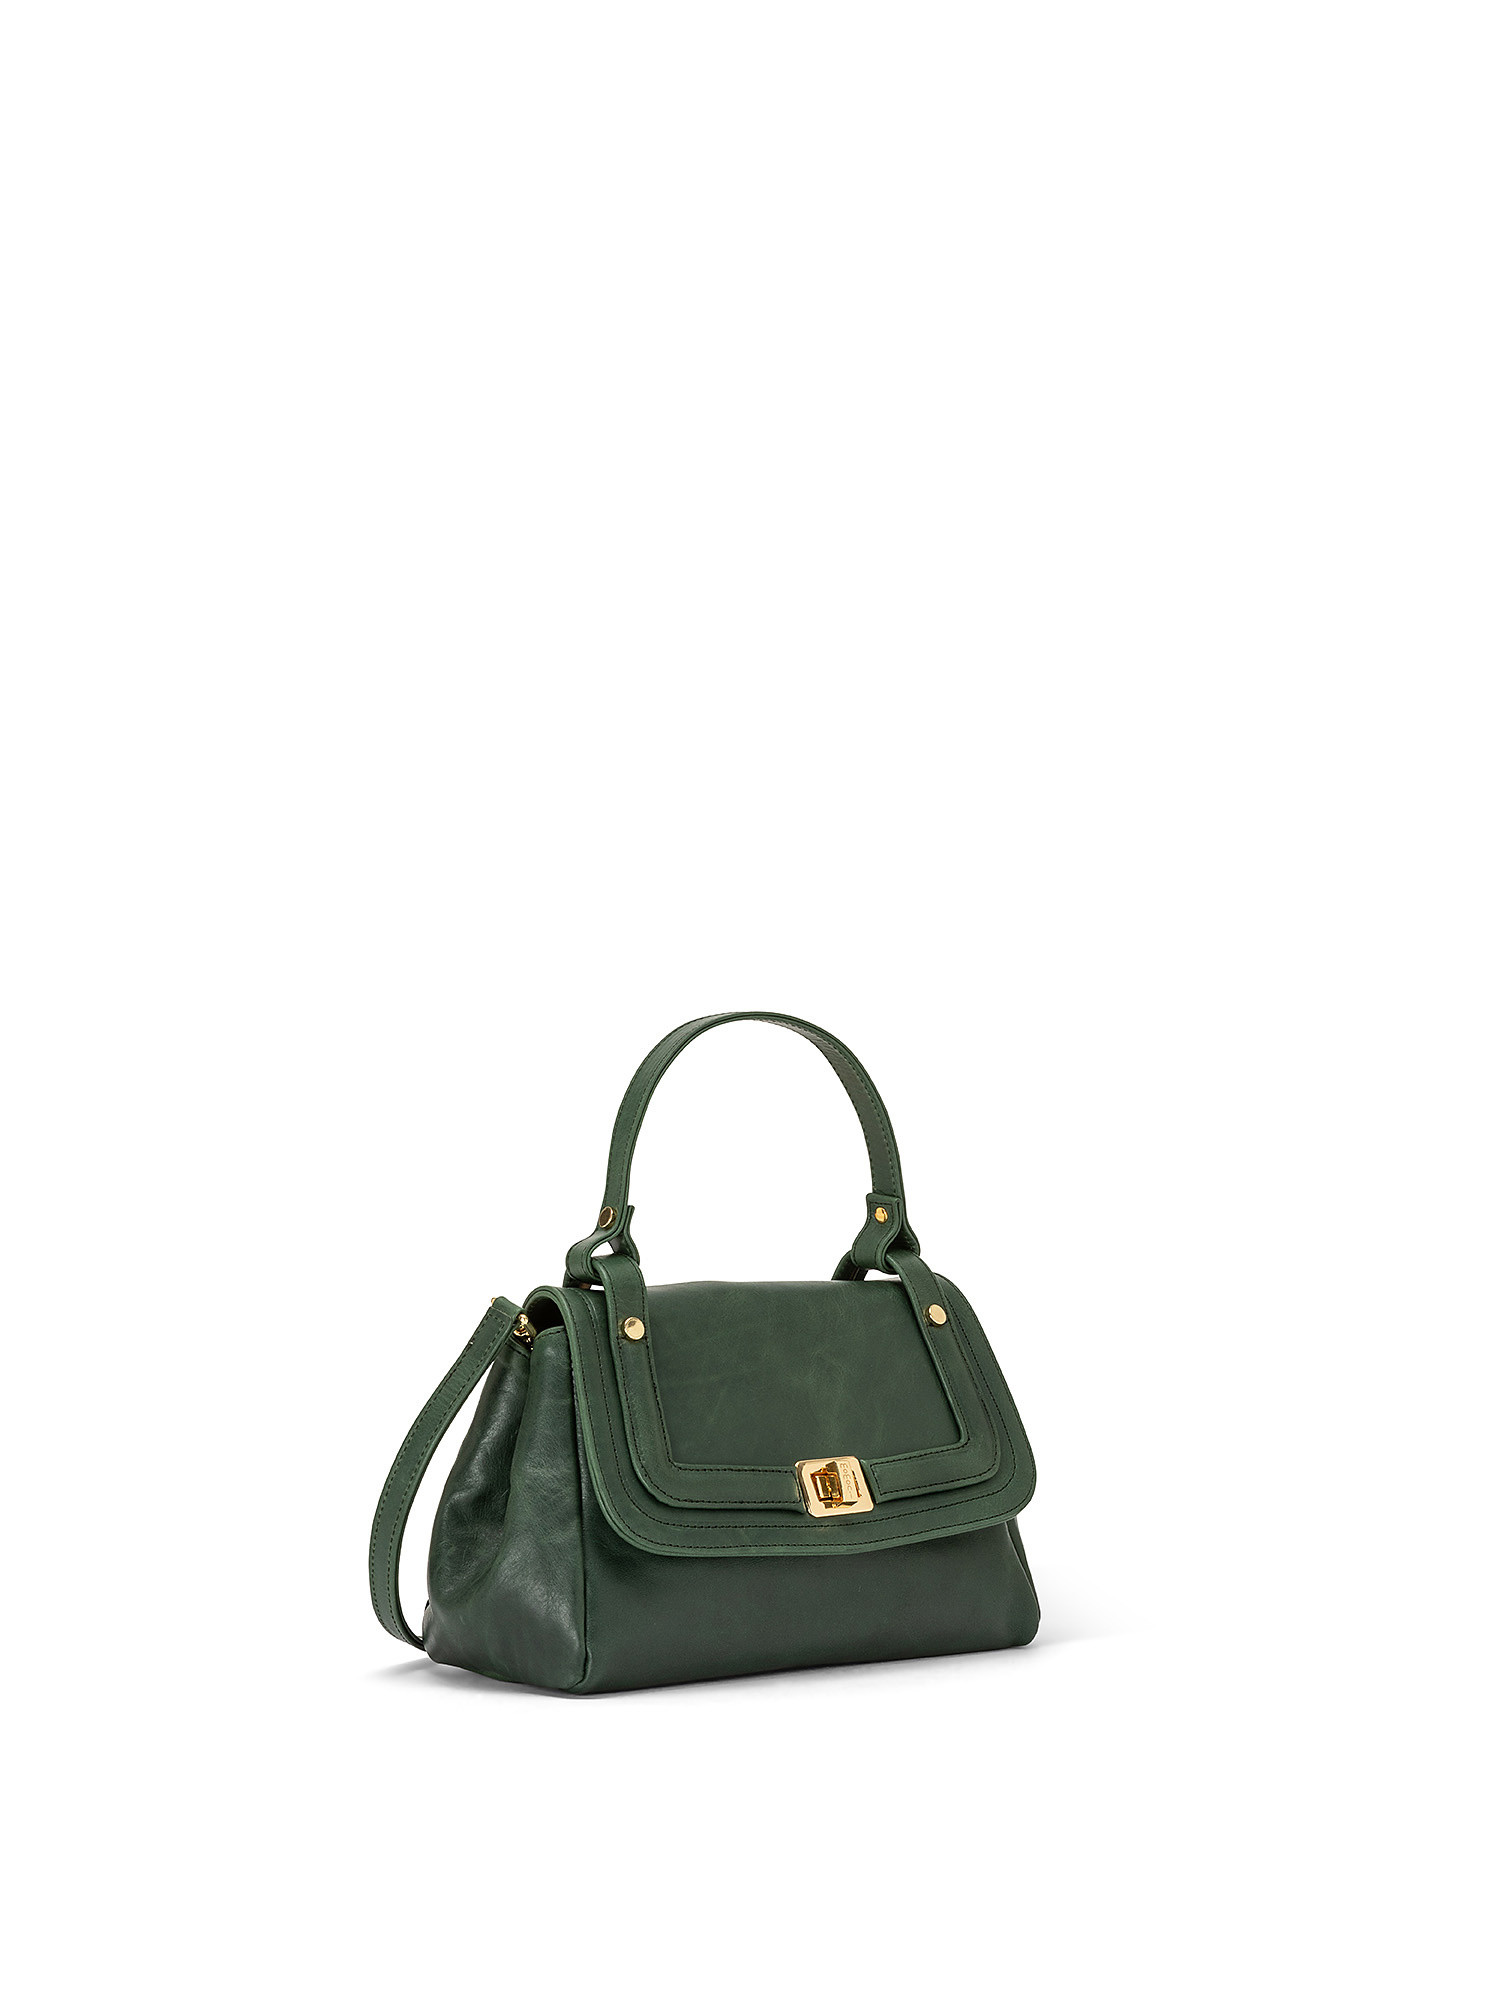 Petit Flore leather bag, Green, large image number 1